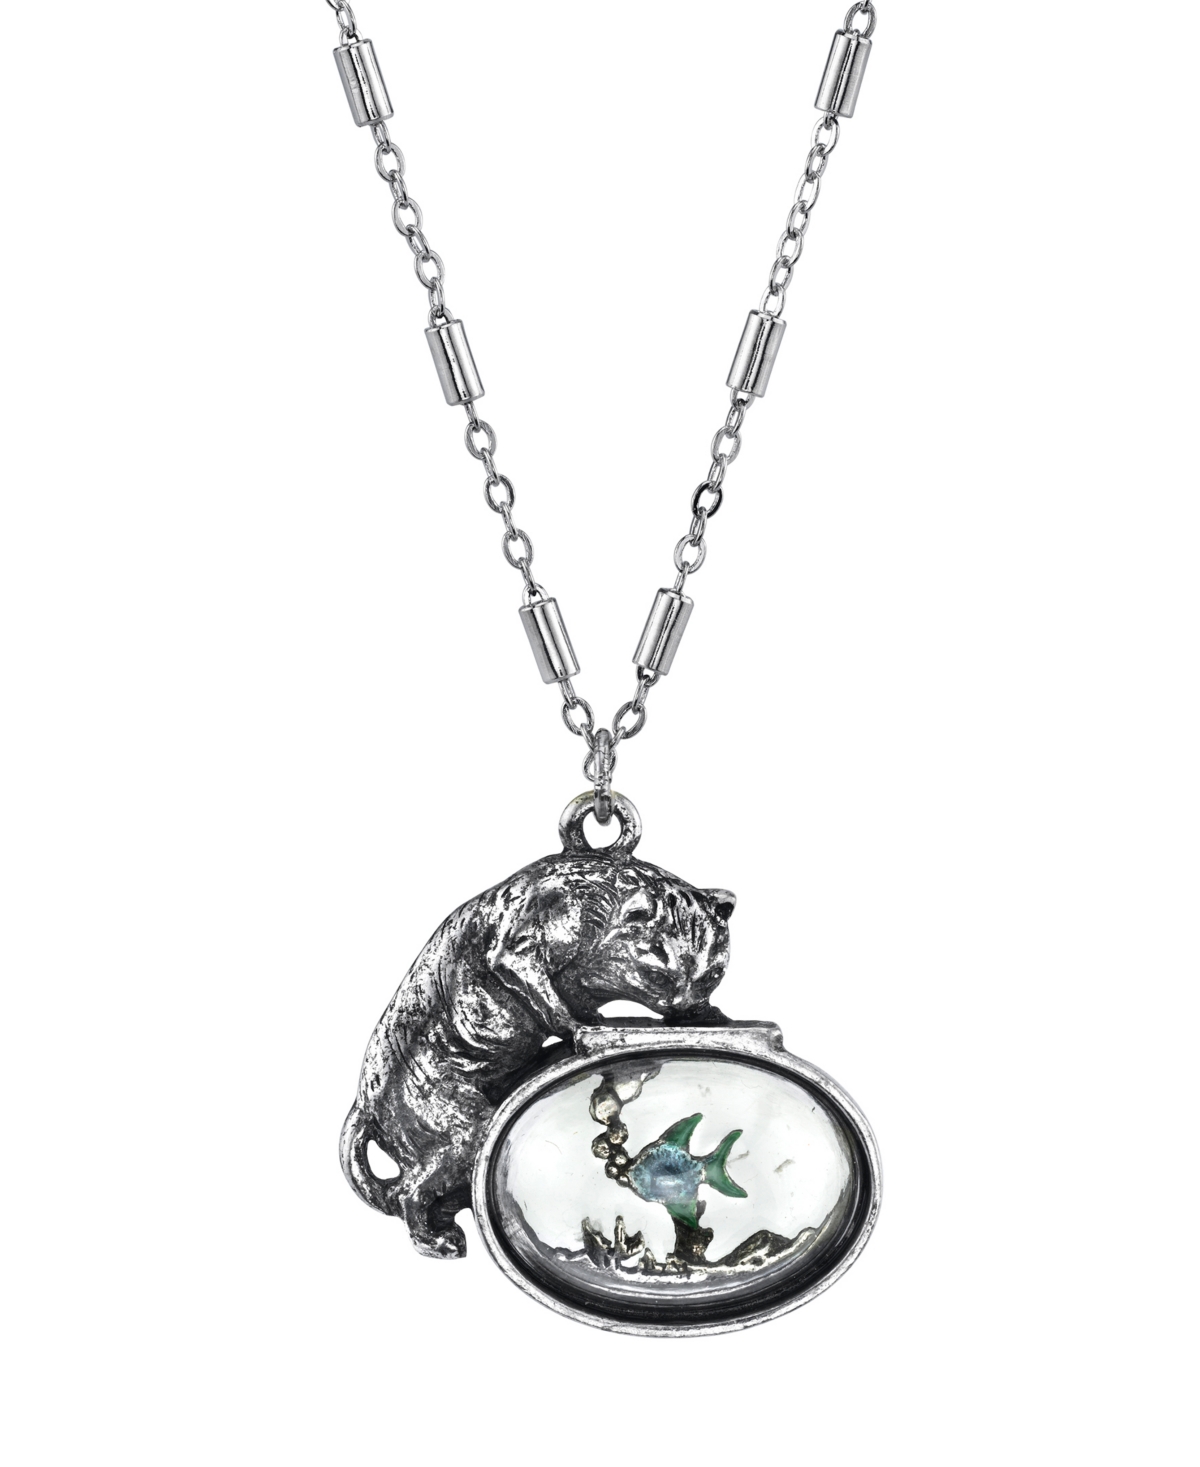 2028 Pewter Cat With Blue Enamel Fish In Glass Fishbowl Necklace 30"